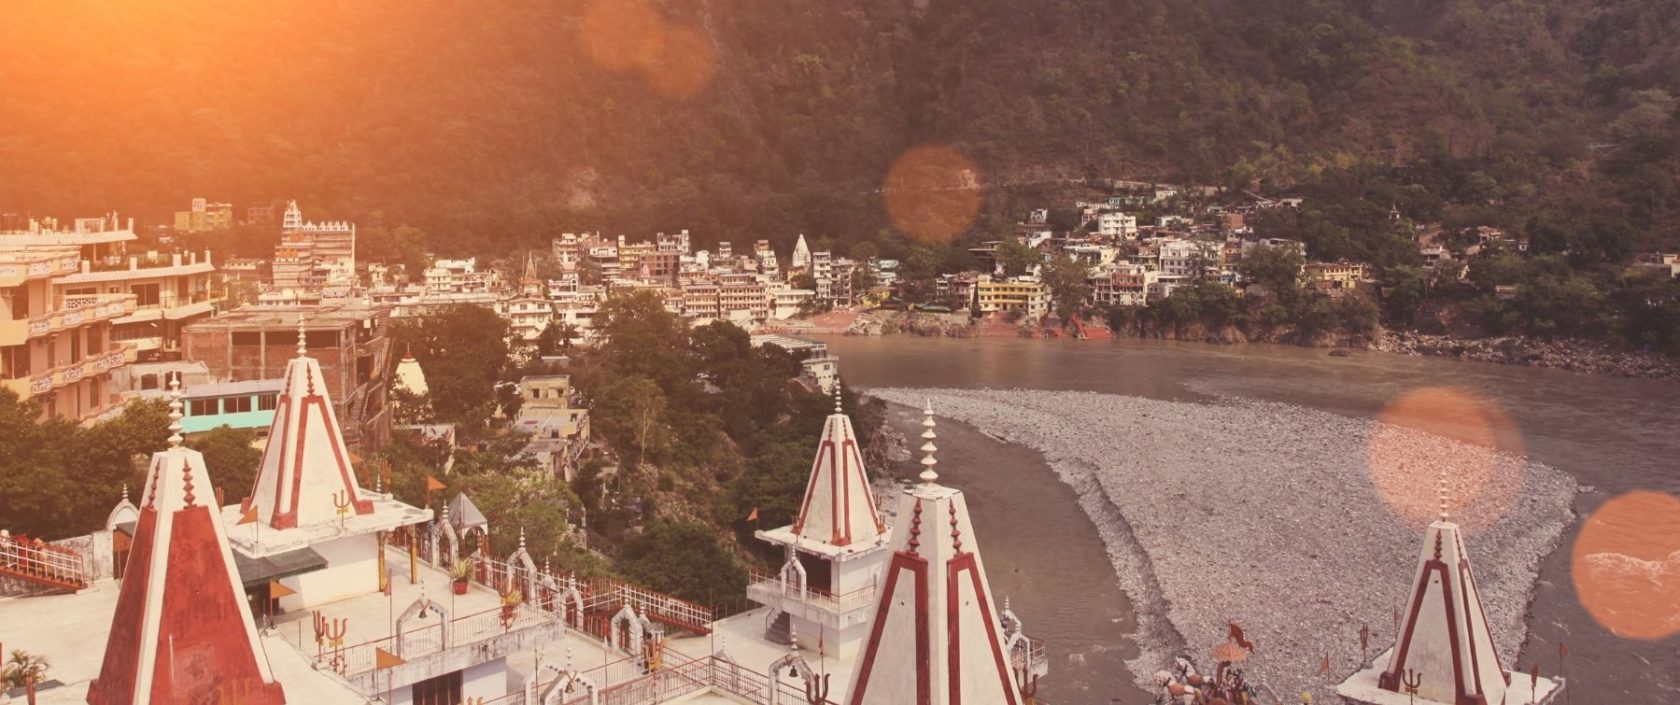 rishikesh city in india himalayas south africa mountain city